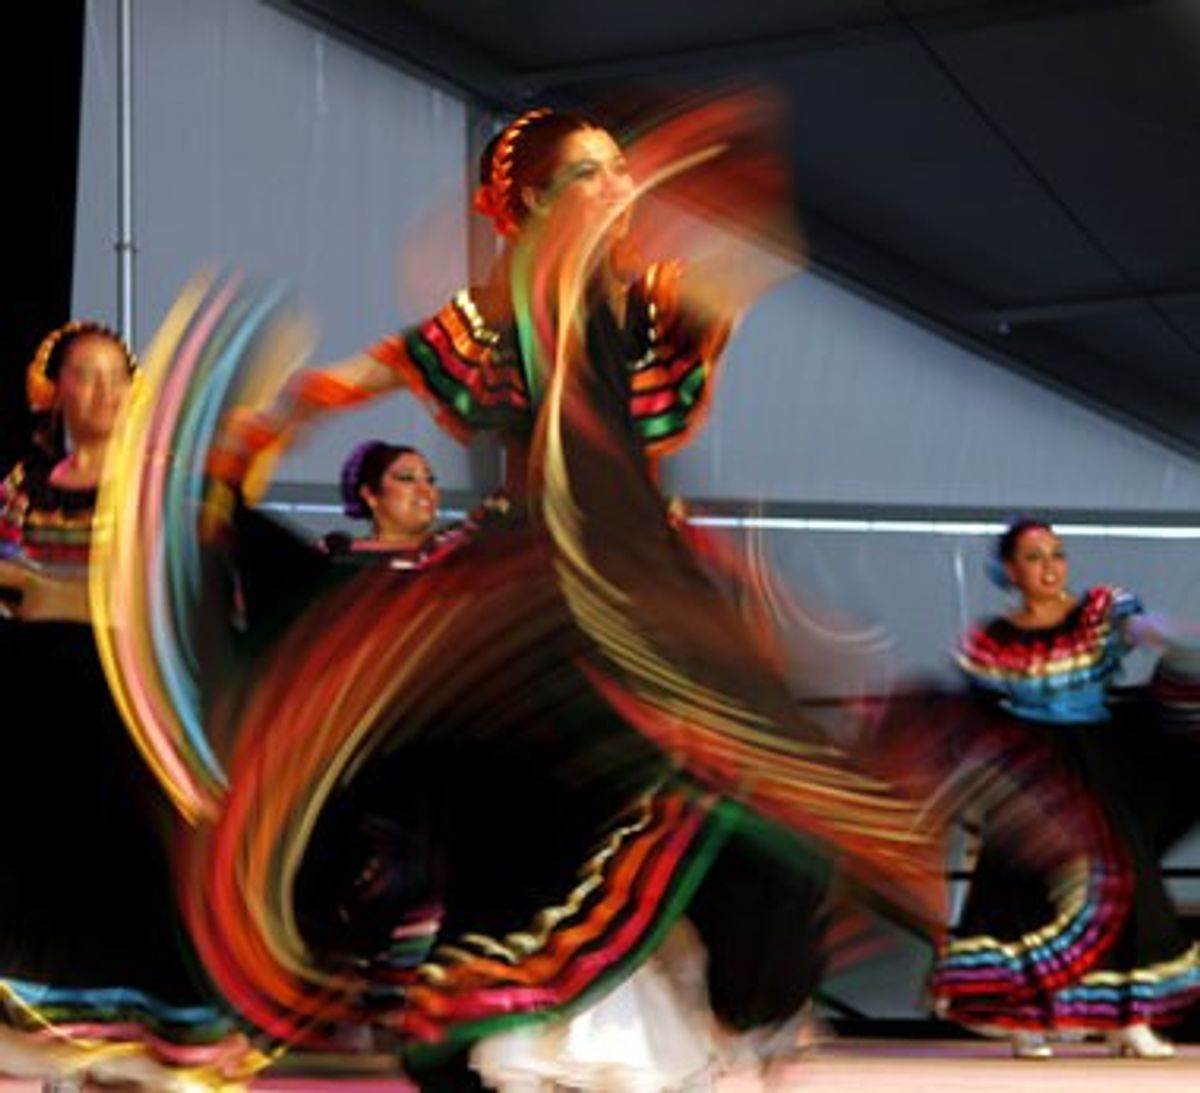 Why Do Some Schools Care More About Cinco de Mayo Than National Hispanic Heritage Month?